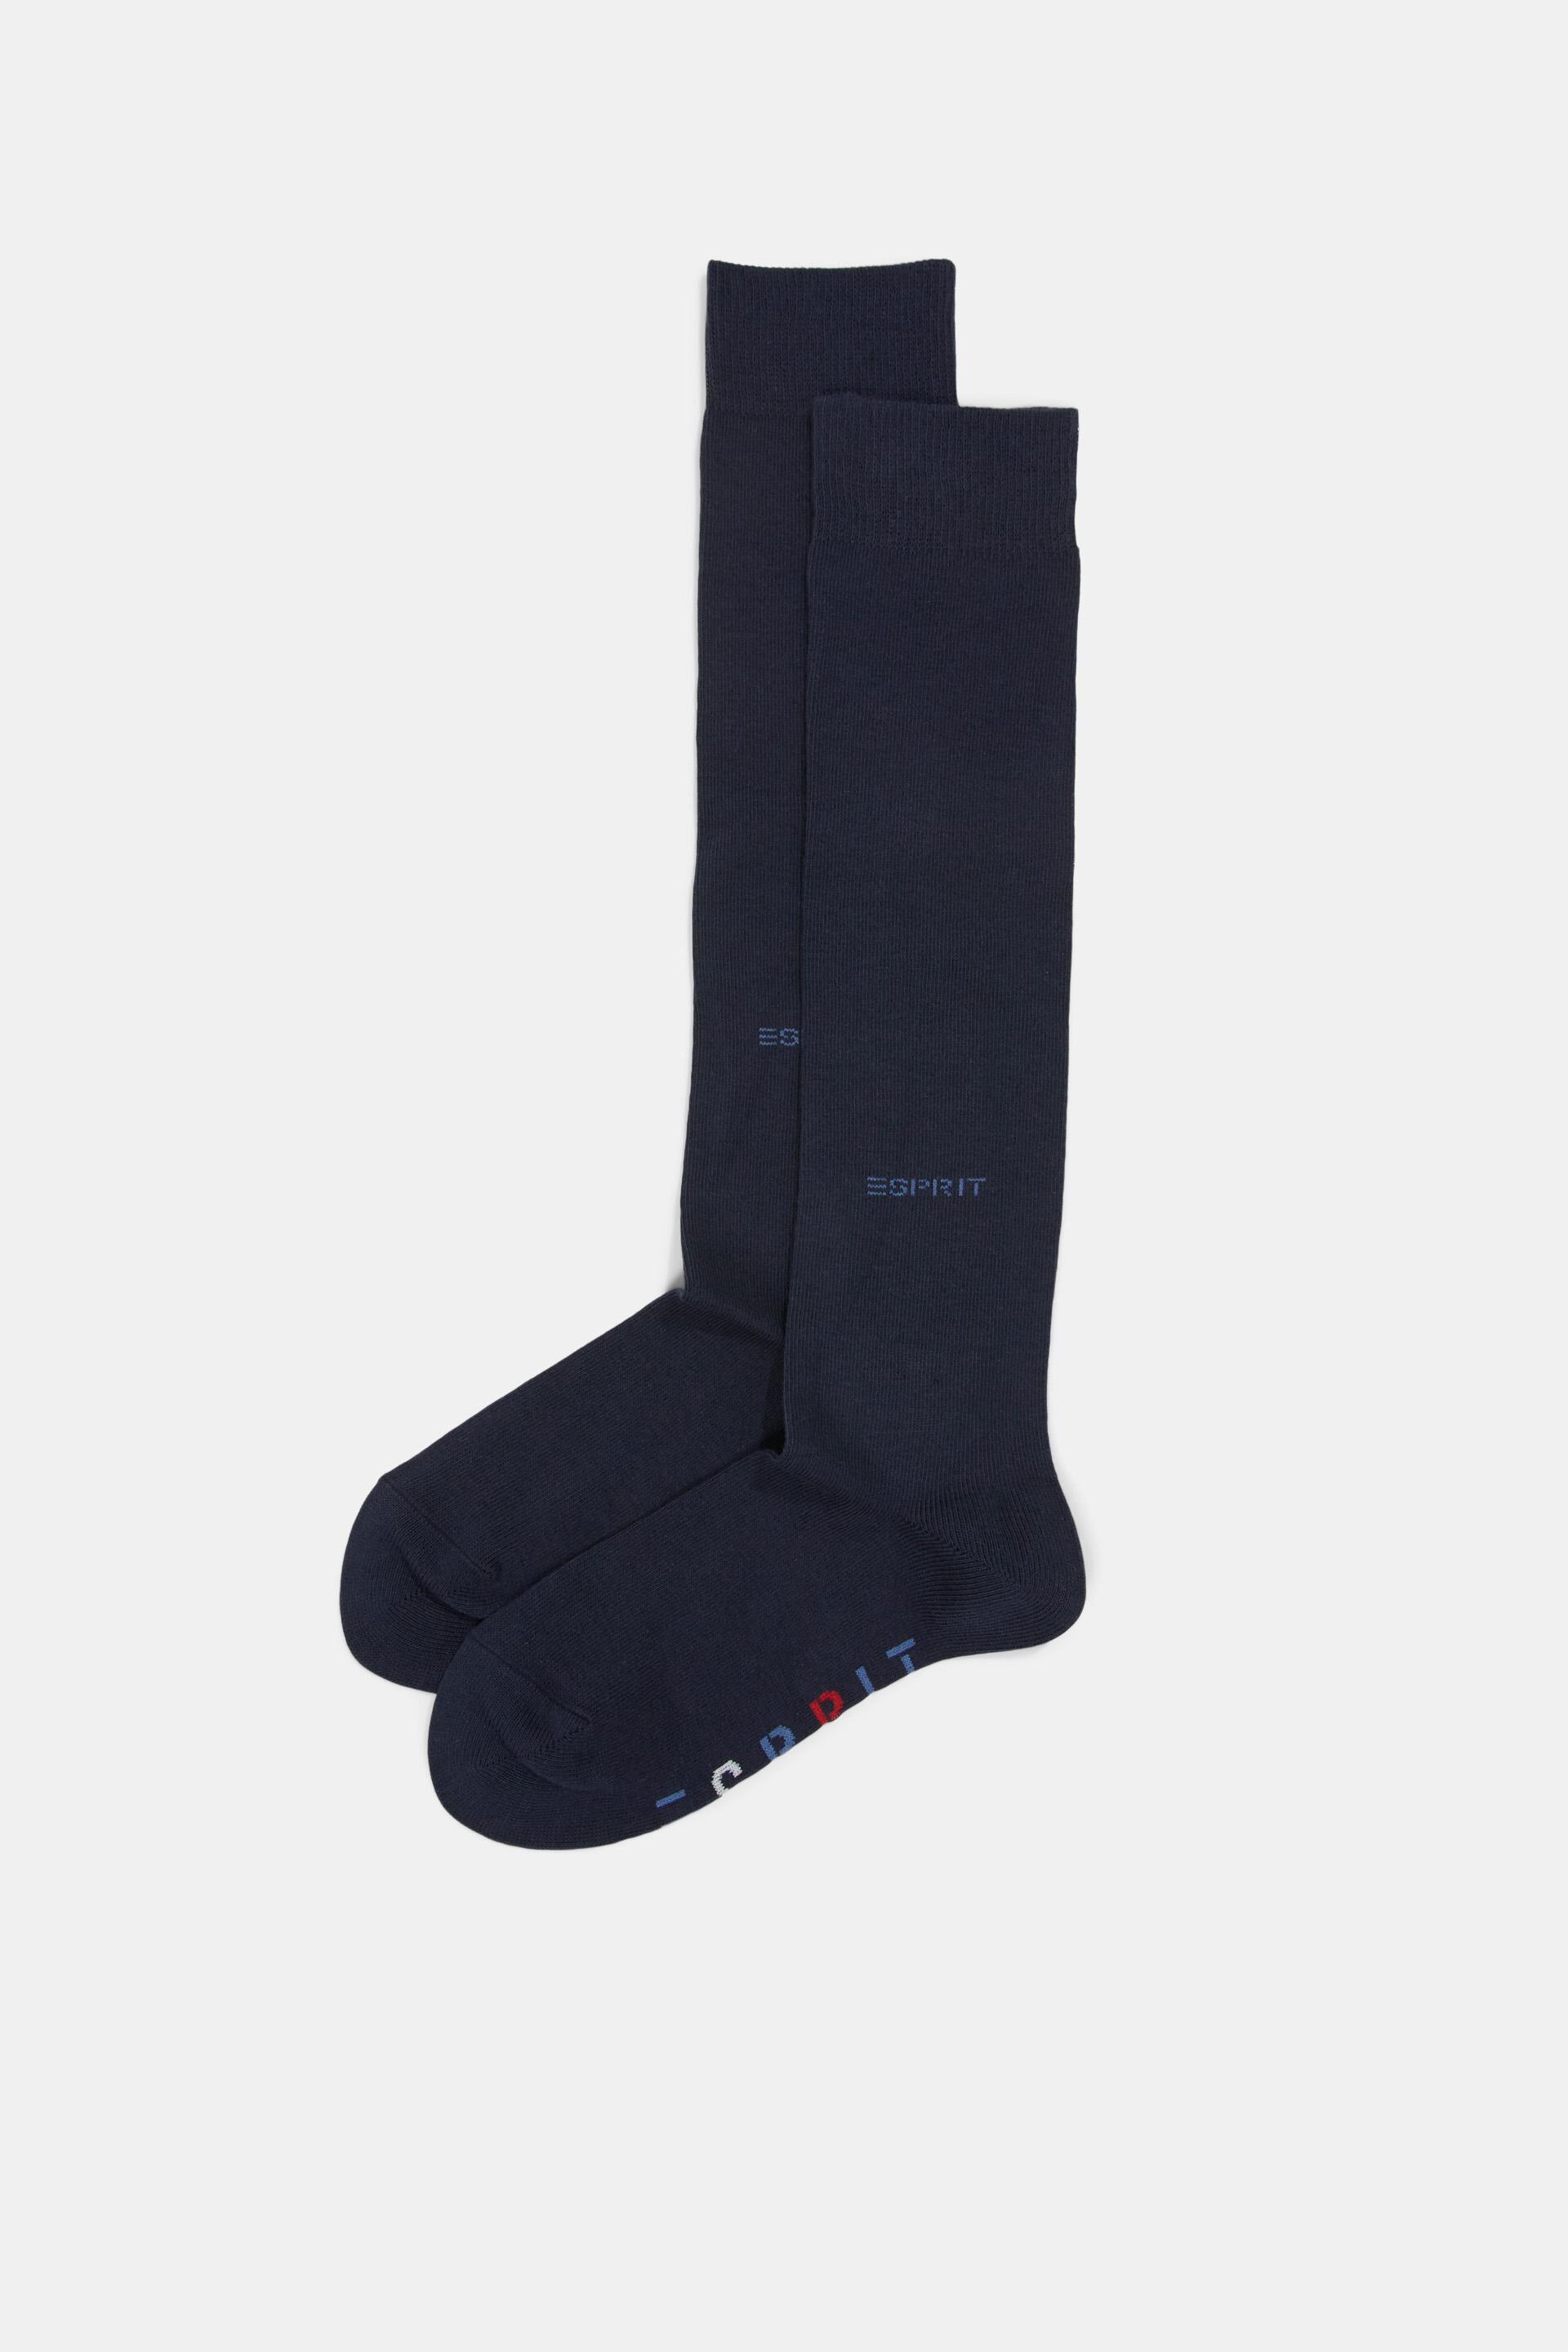 Esprit of Double socks with logo a knee-high pack